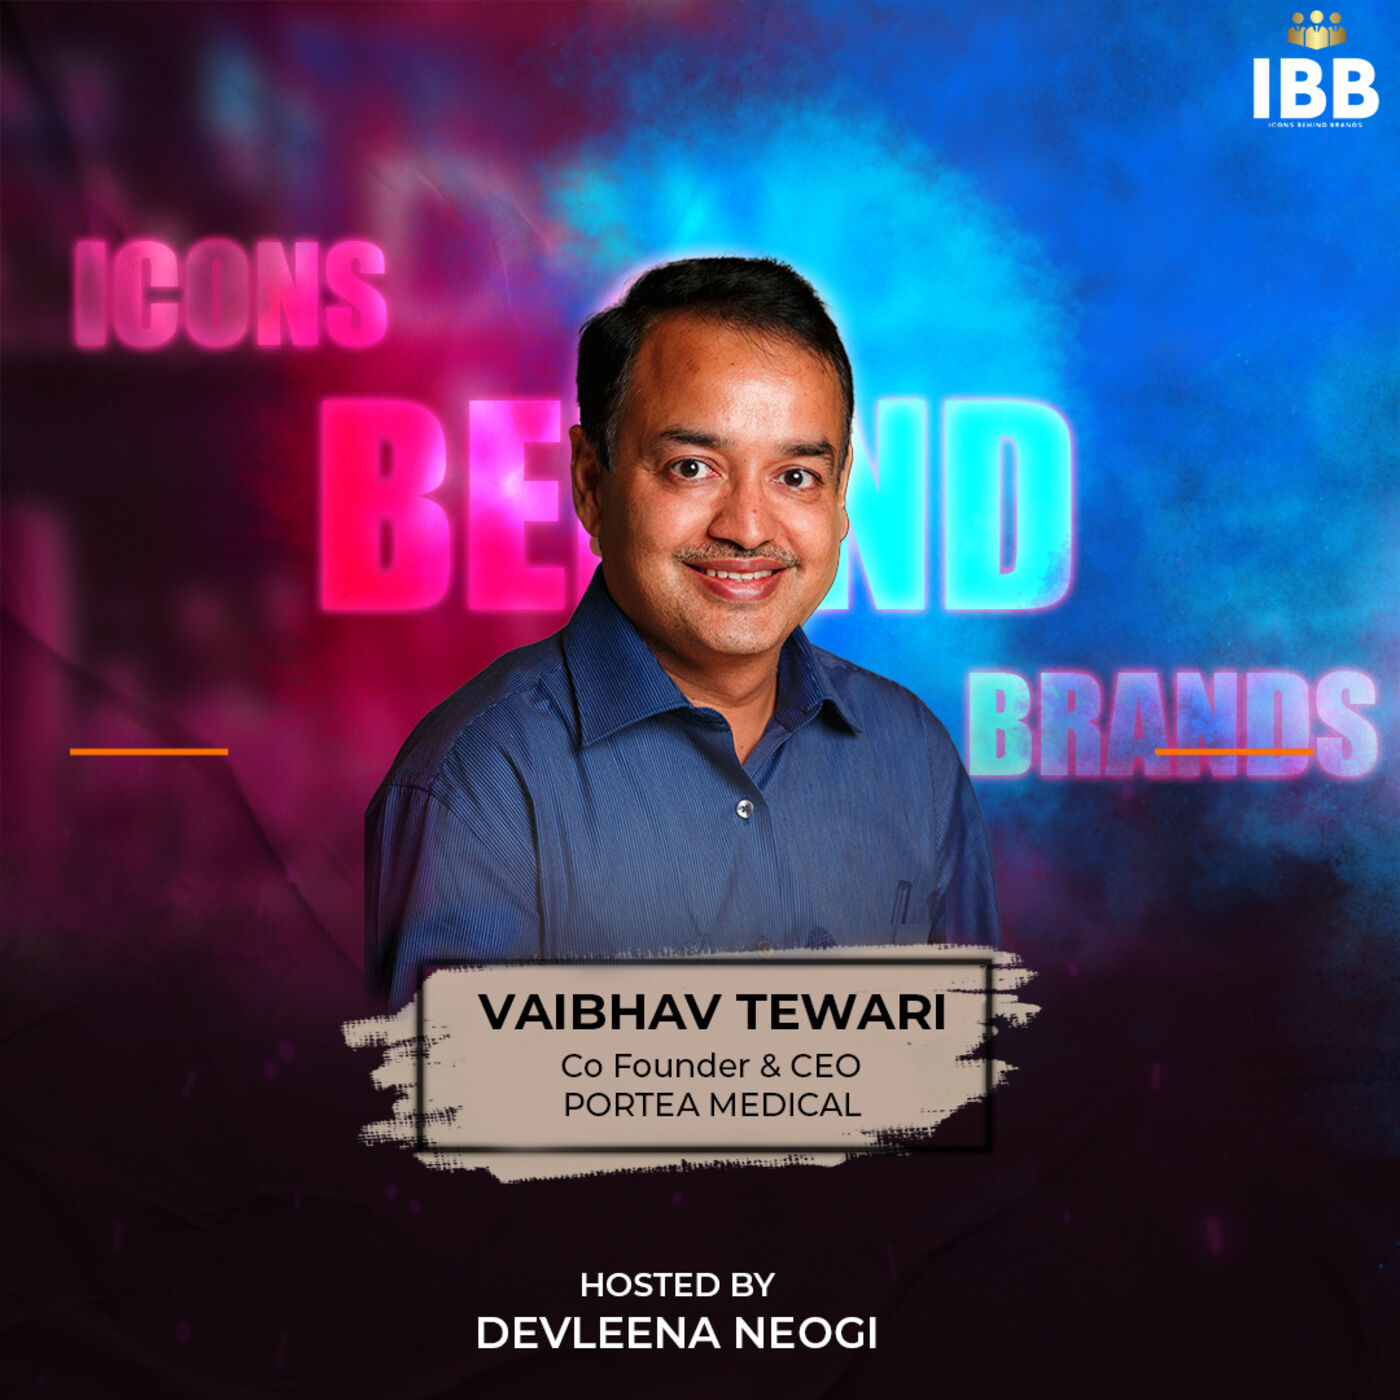 Upcoming action-packed interview with Vaibhav Tewari | Portea Medical | Icons Behind Brands